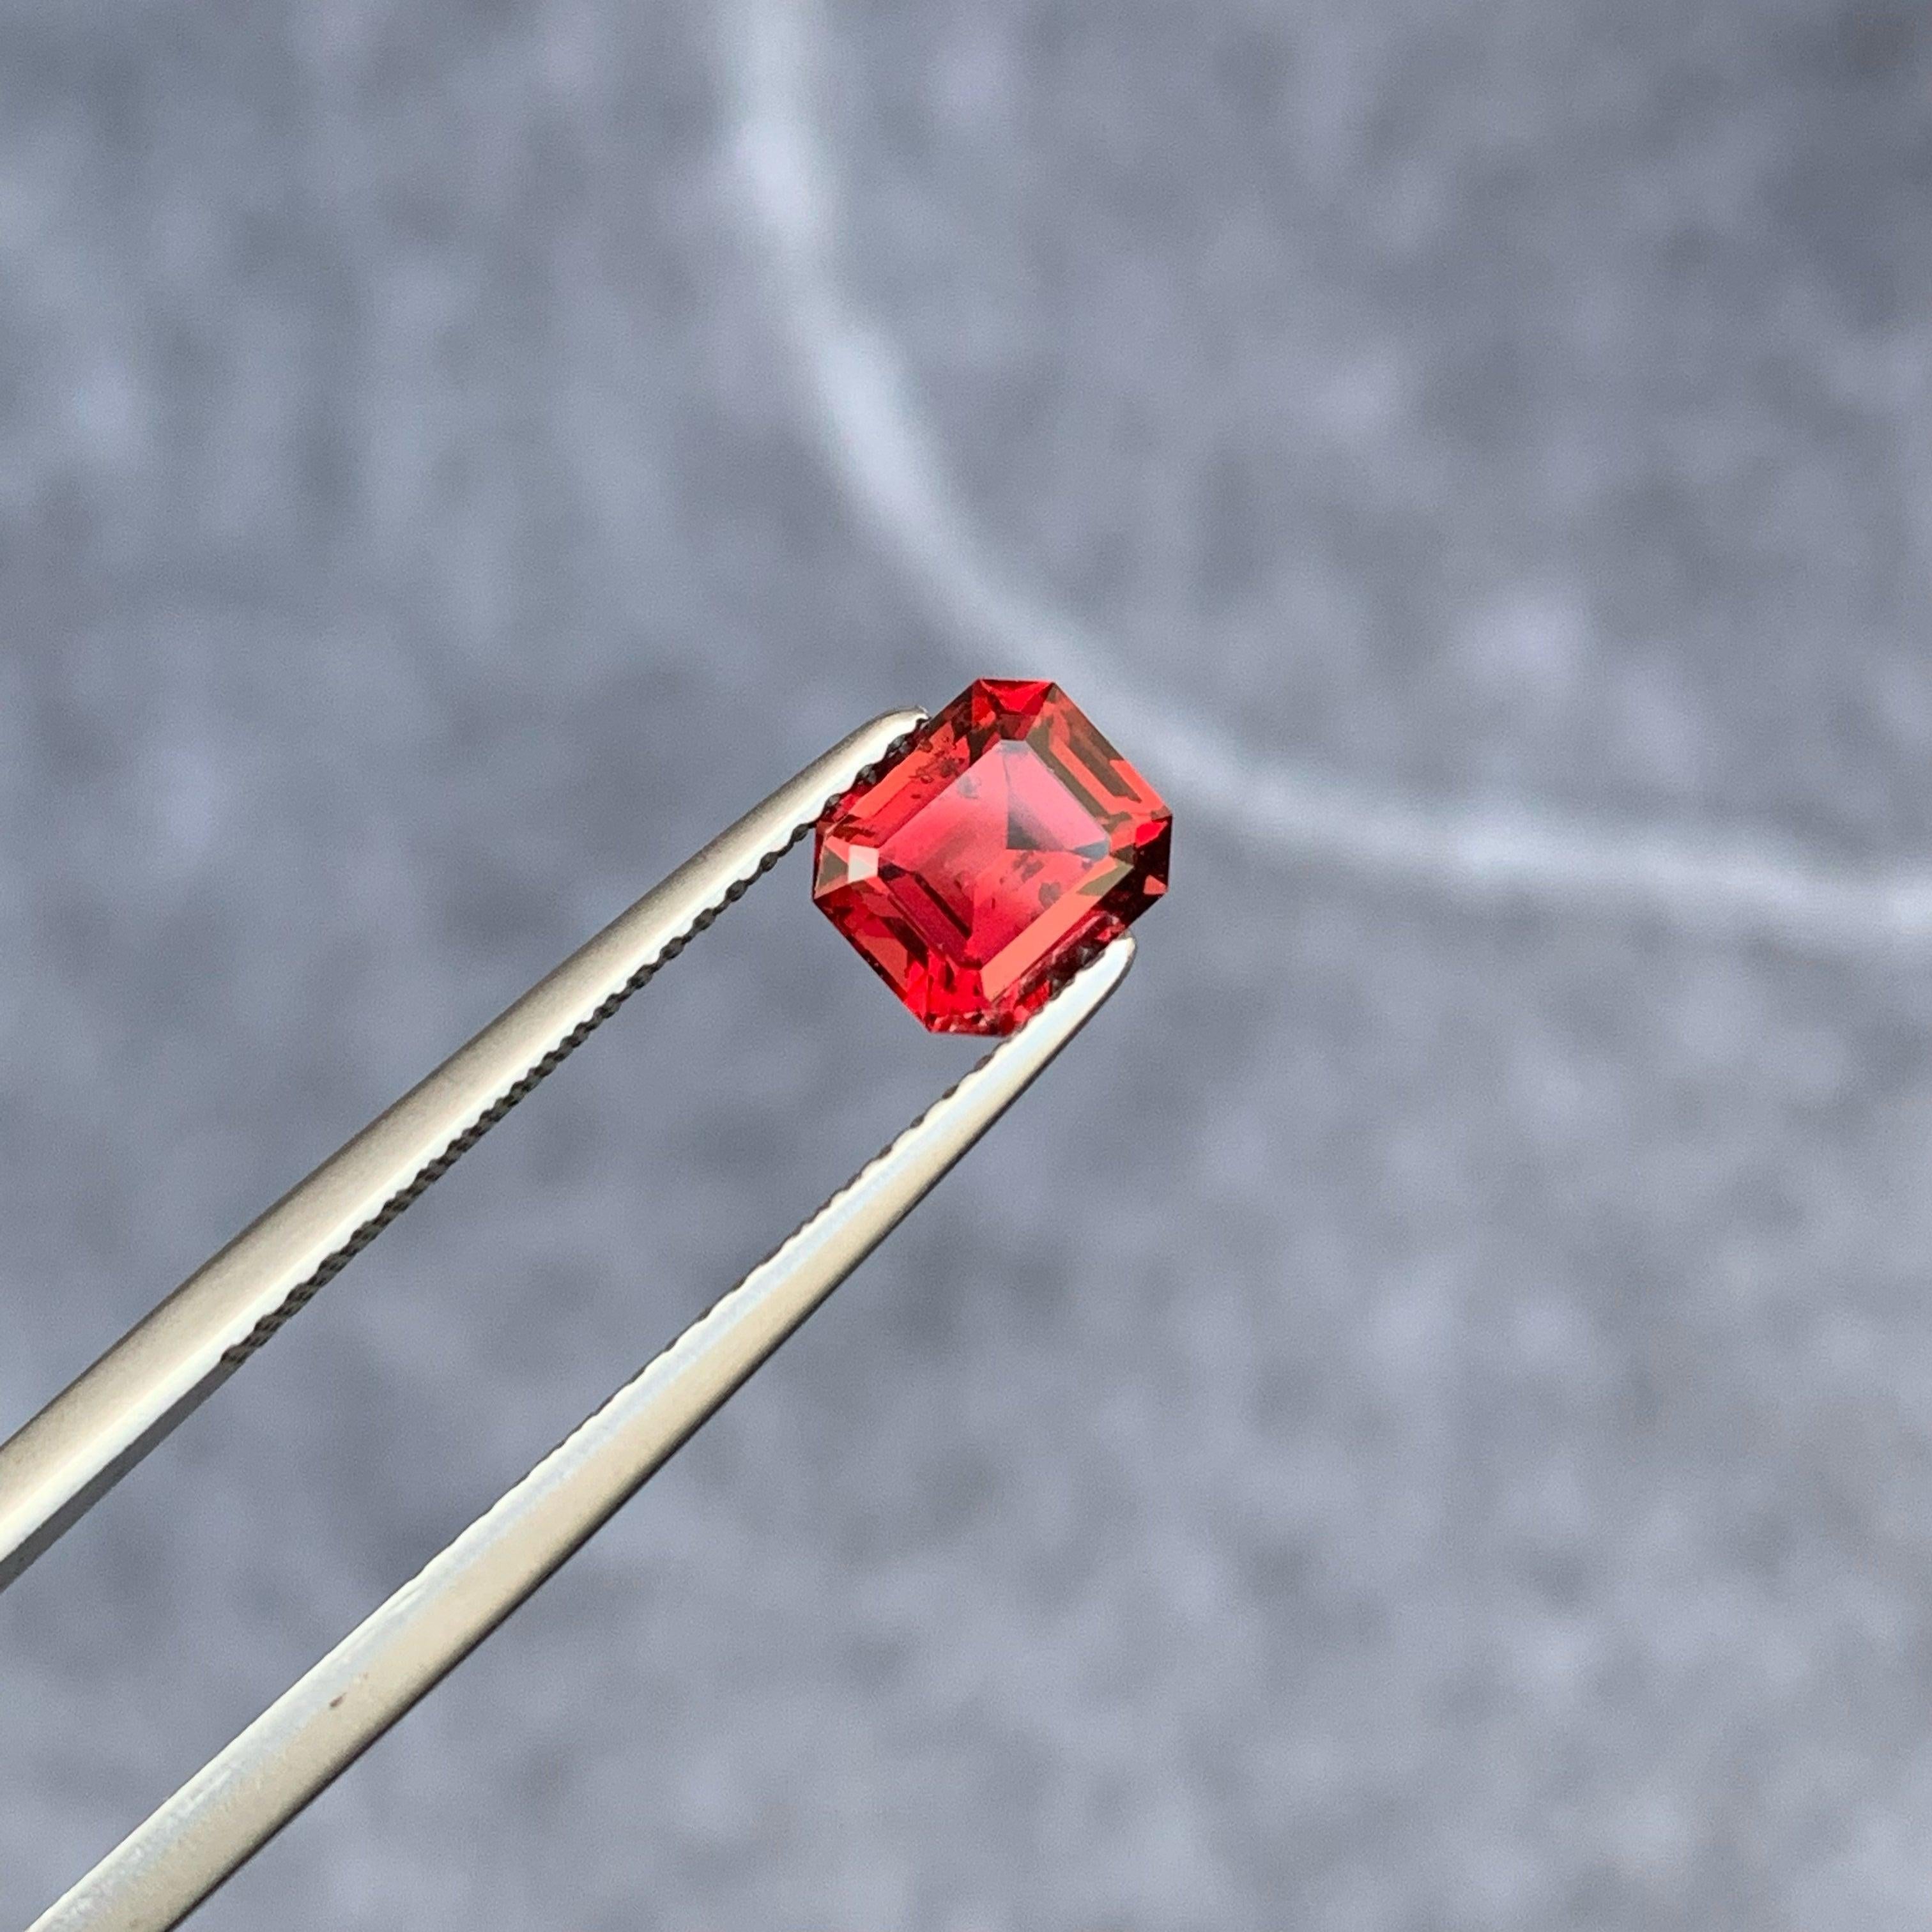 Marvelous Red Umbalite Garnet Gemstone, Available for sale at whole sale price natural high quality 1.50 carats SI Clarity Natural Loose Garnet from Tanzania.

Product Information:
GEMSTONE NAME: Marvelous Red Umbalite Garnet Gemstone
WEIGHT:	1.50